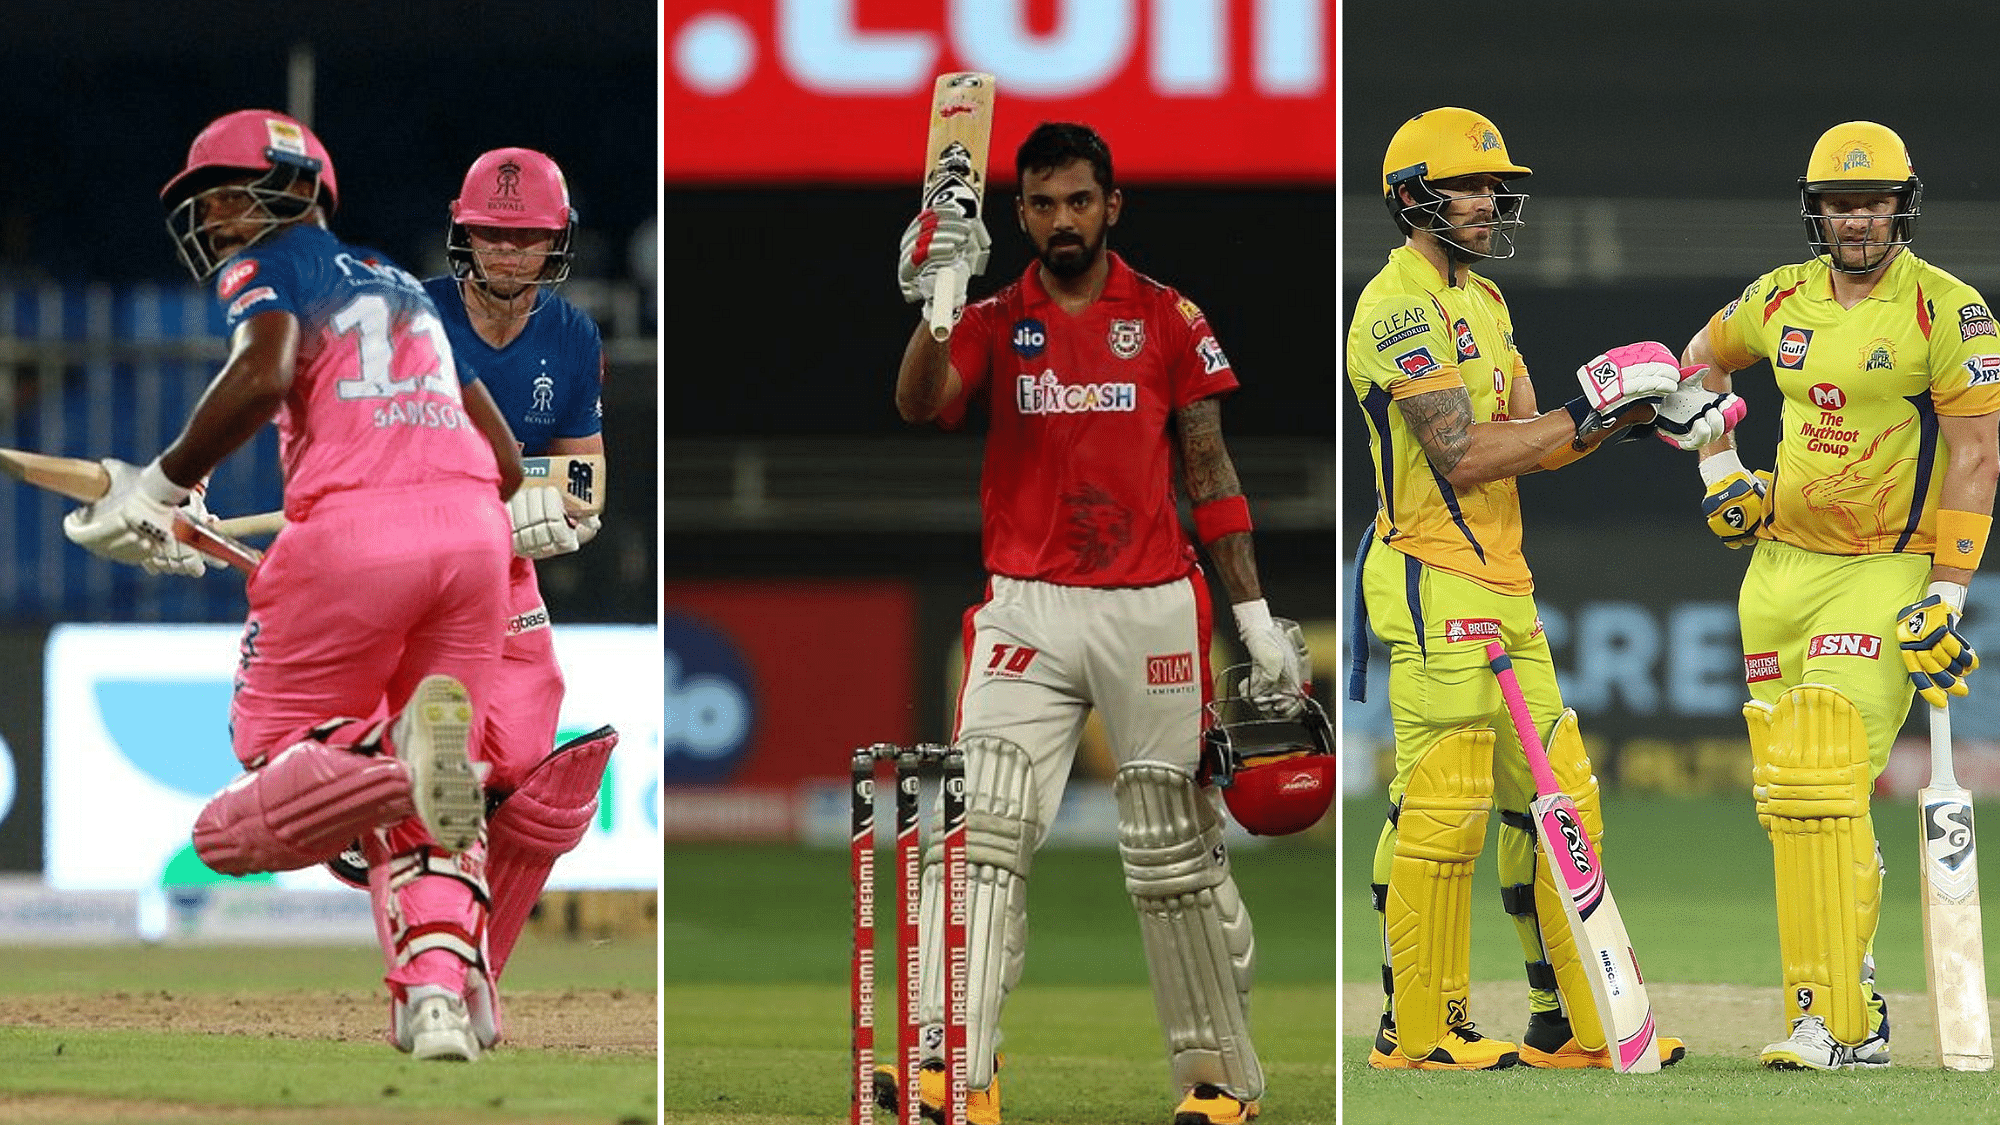 Six, Four, No-ball, Century, 200+ total and many other firsts of the Indian Premier League 2020